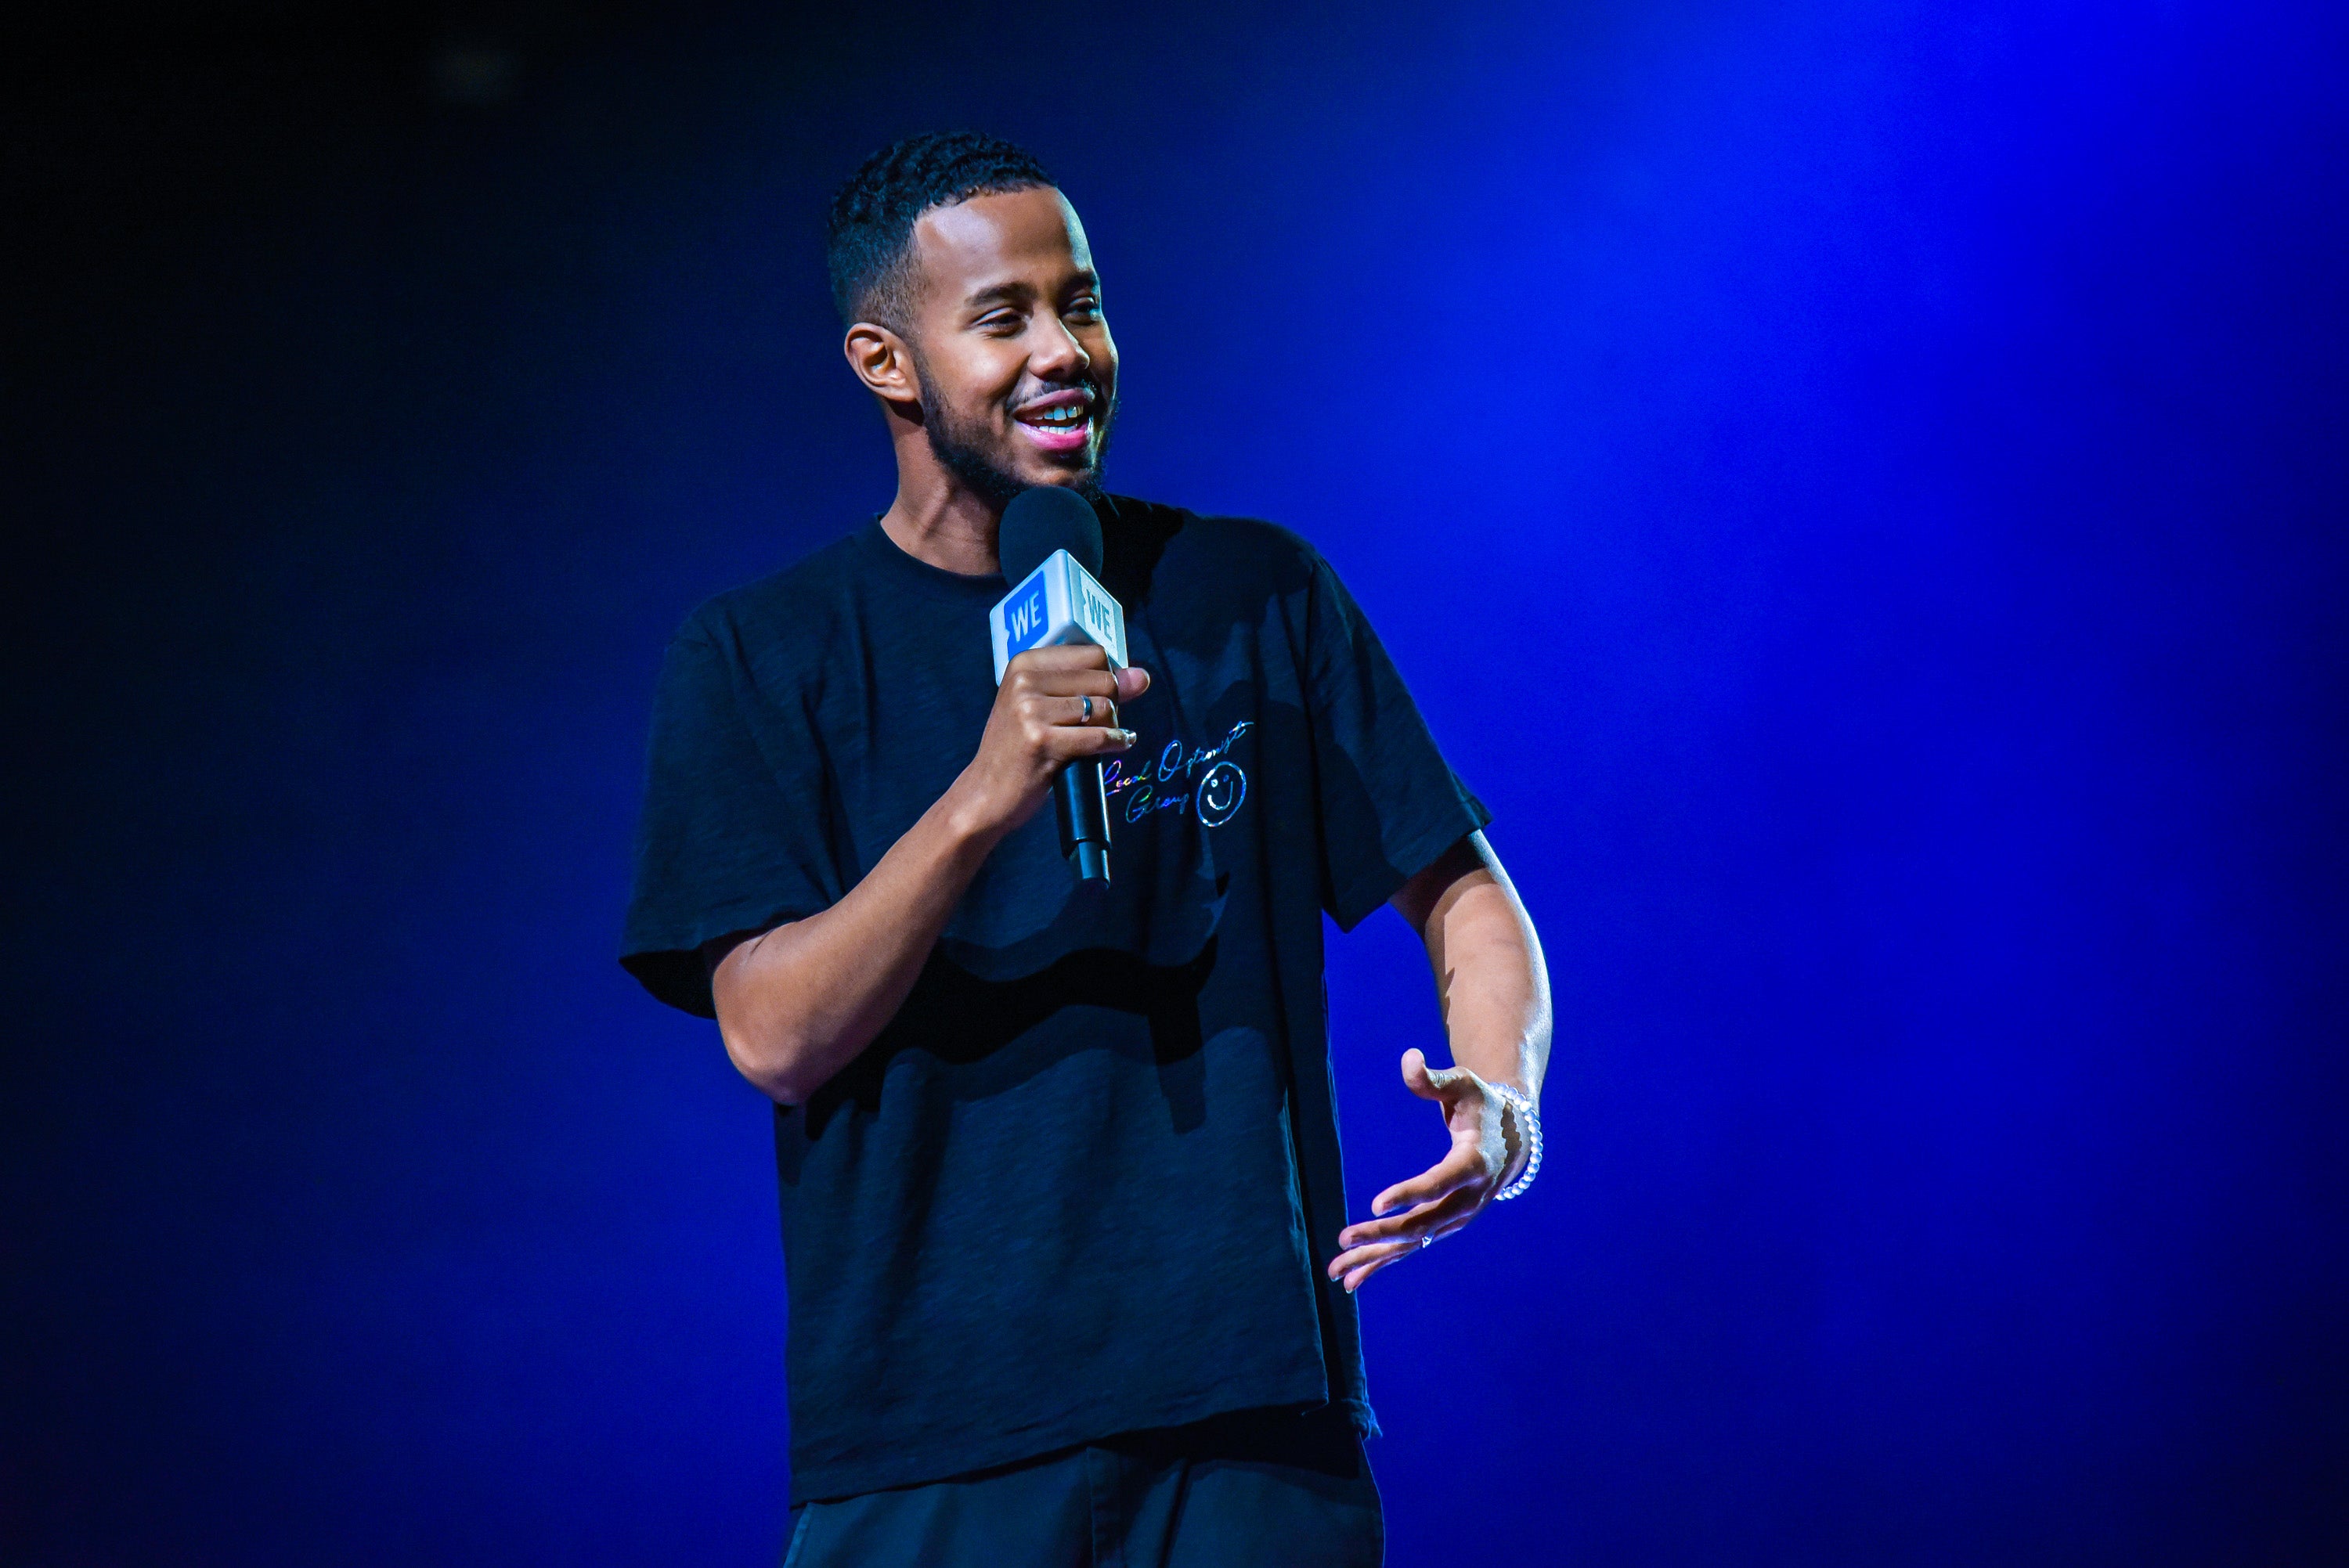 File image: Mustafa the Poet performs on stage during the 2018 WE Day Toronto Show at Scotiabank Arena